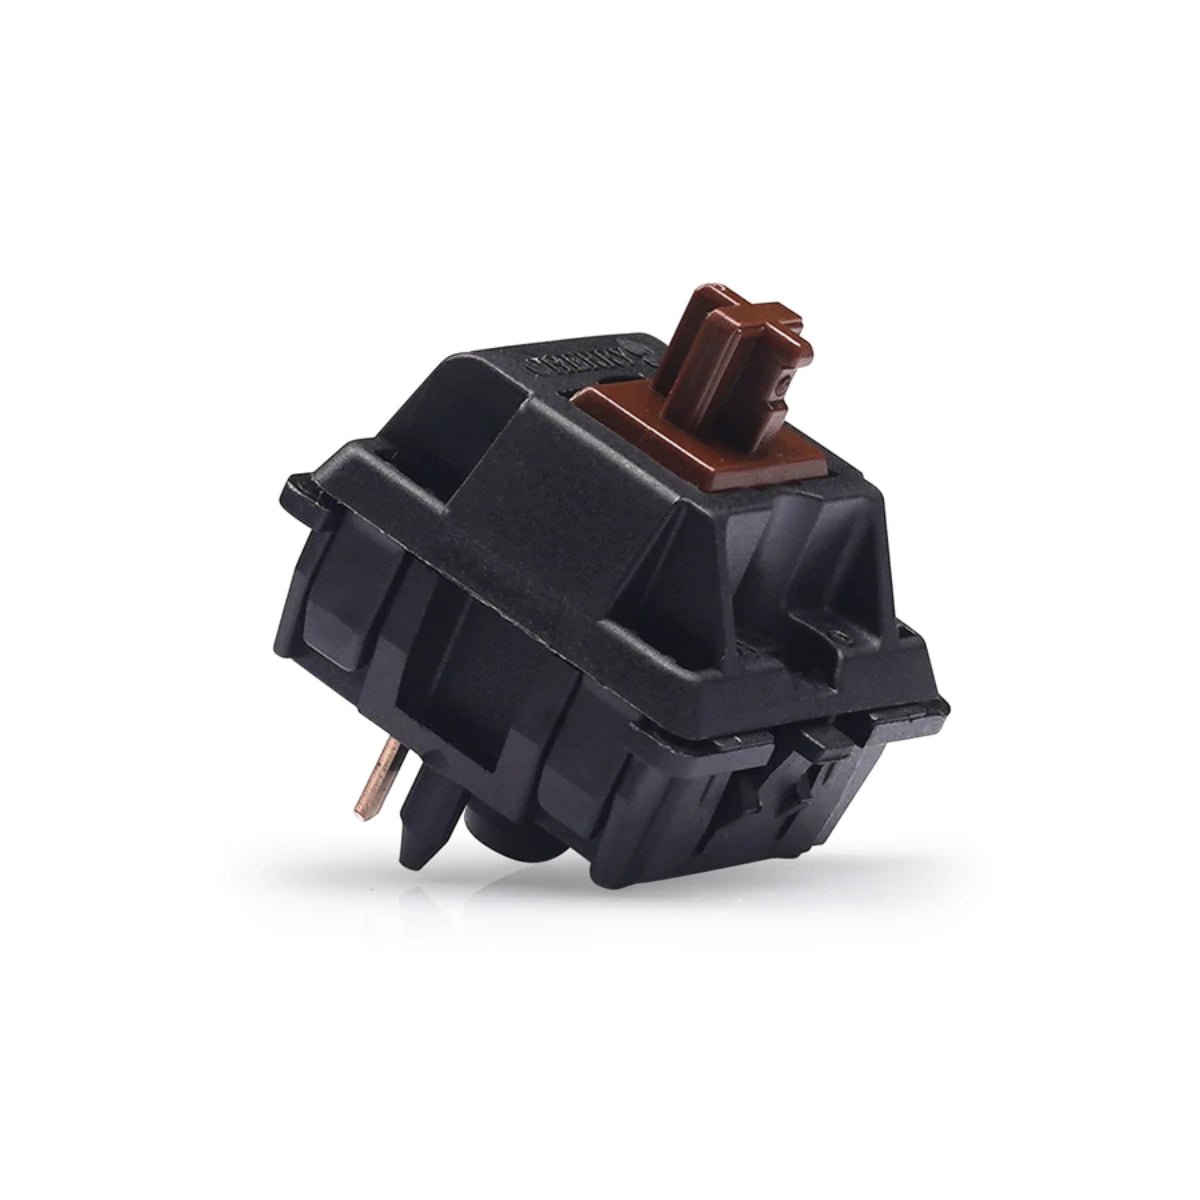 KBD Fans Cherry MX Hyperglide Tactile Switches - Brown - Store 974 | ستور ٩٧٤